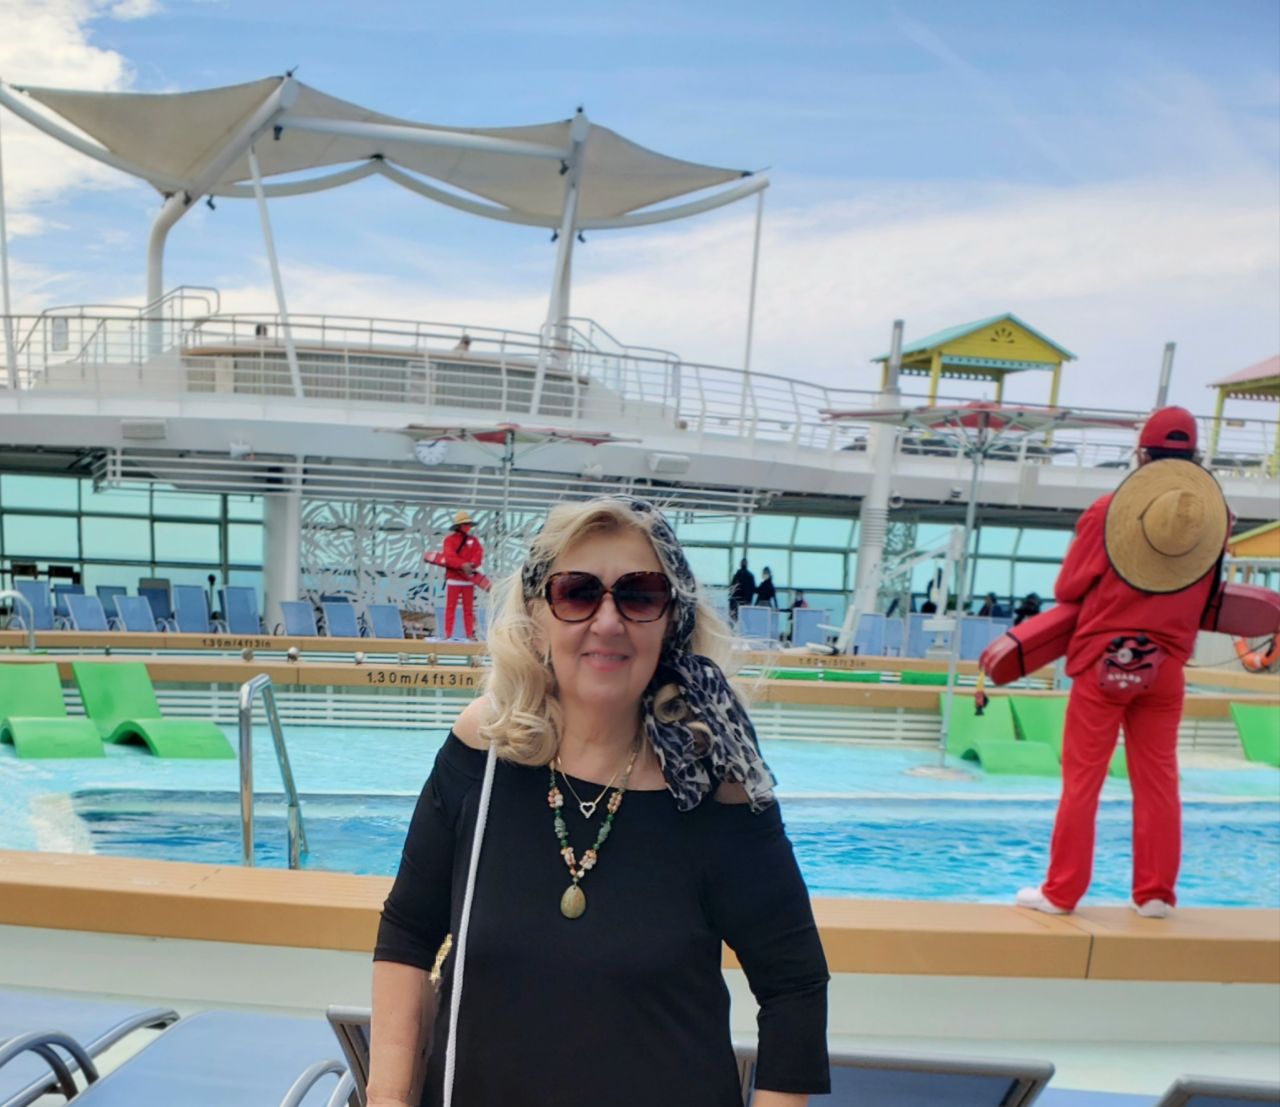 Suzanne Lankes, pictured aboard Royal Caribbean's Navigator of the Seas in March, has purchased a Storylines cruise ship residence.